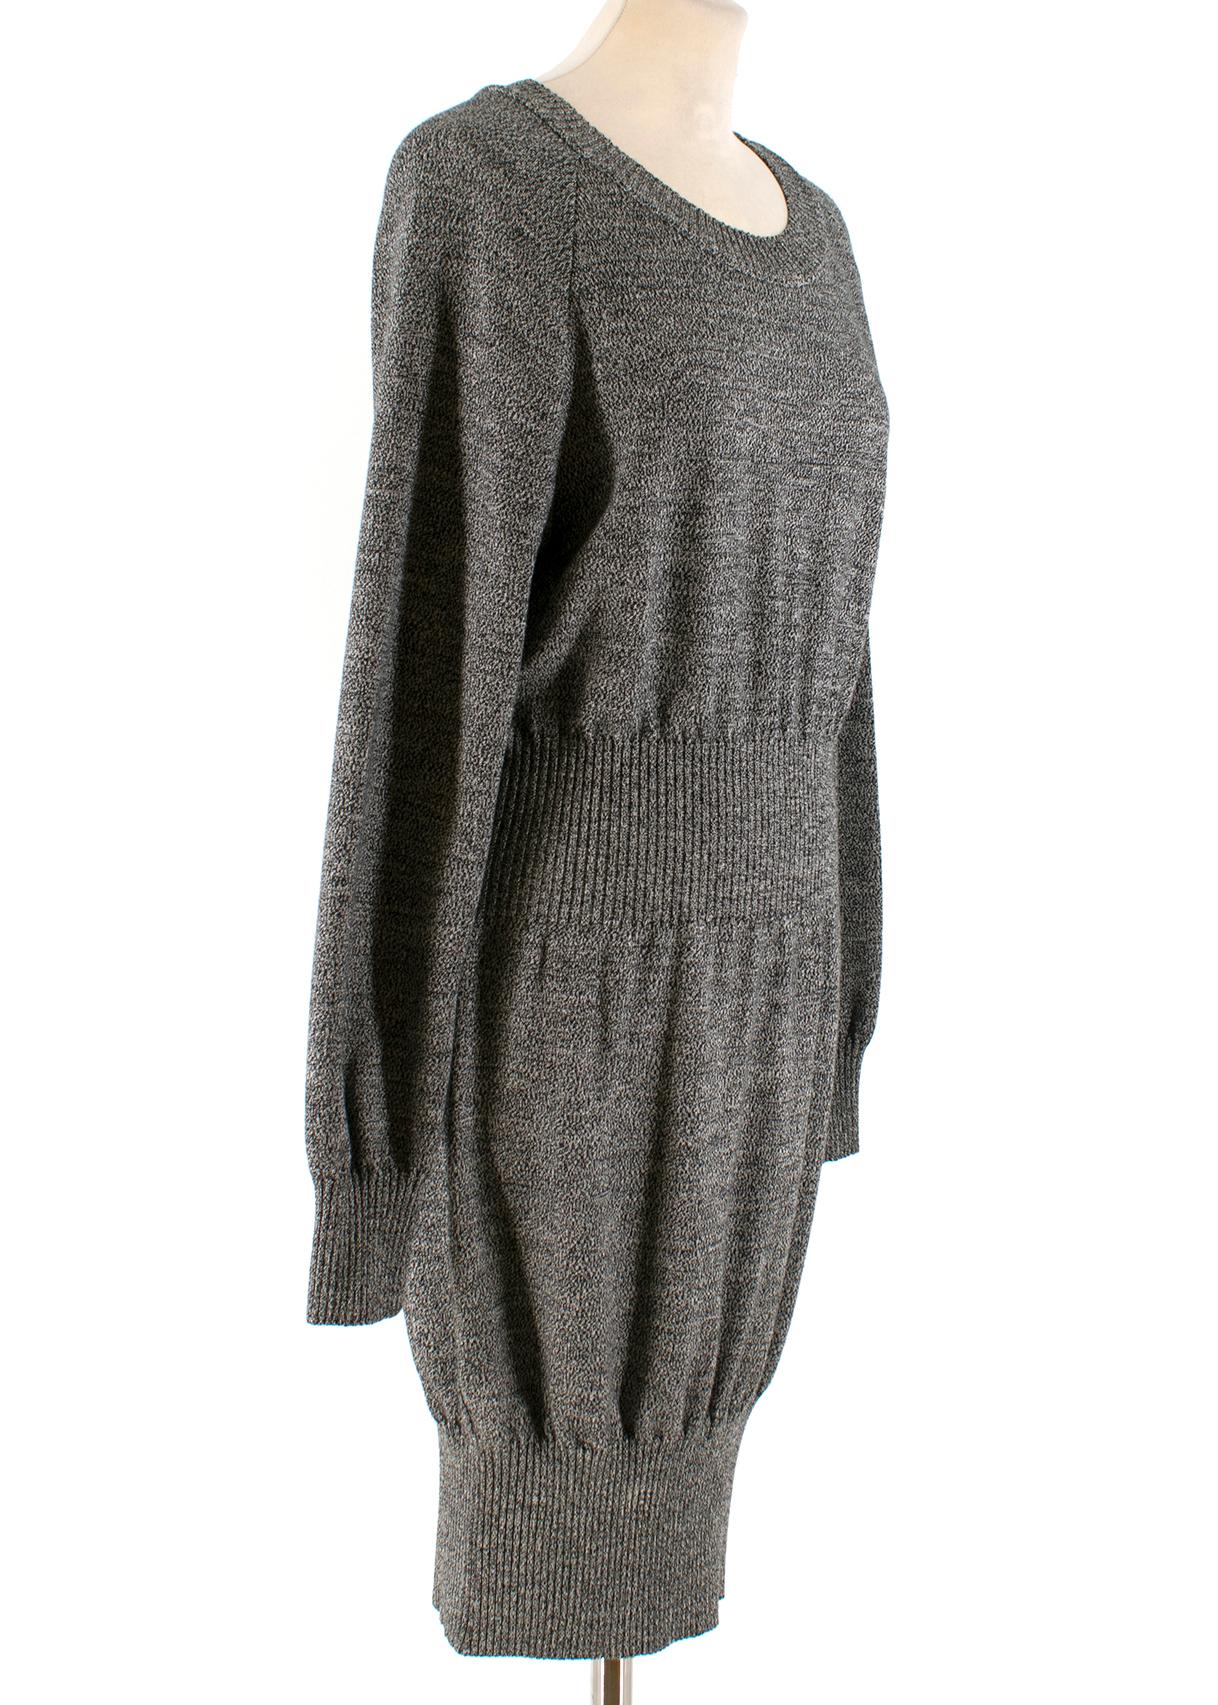 Chanel Grey Ribbed-Waist Wool-Knit Dress

-Grey knit dress 
-Long sleeves
-Ribbed-knit hemline, cuffs, collar and waistband
-Back button closure
-Silver tone embossed buttons

Please note, these items are pre-owned and may show signs of being stored